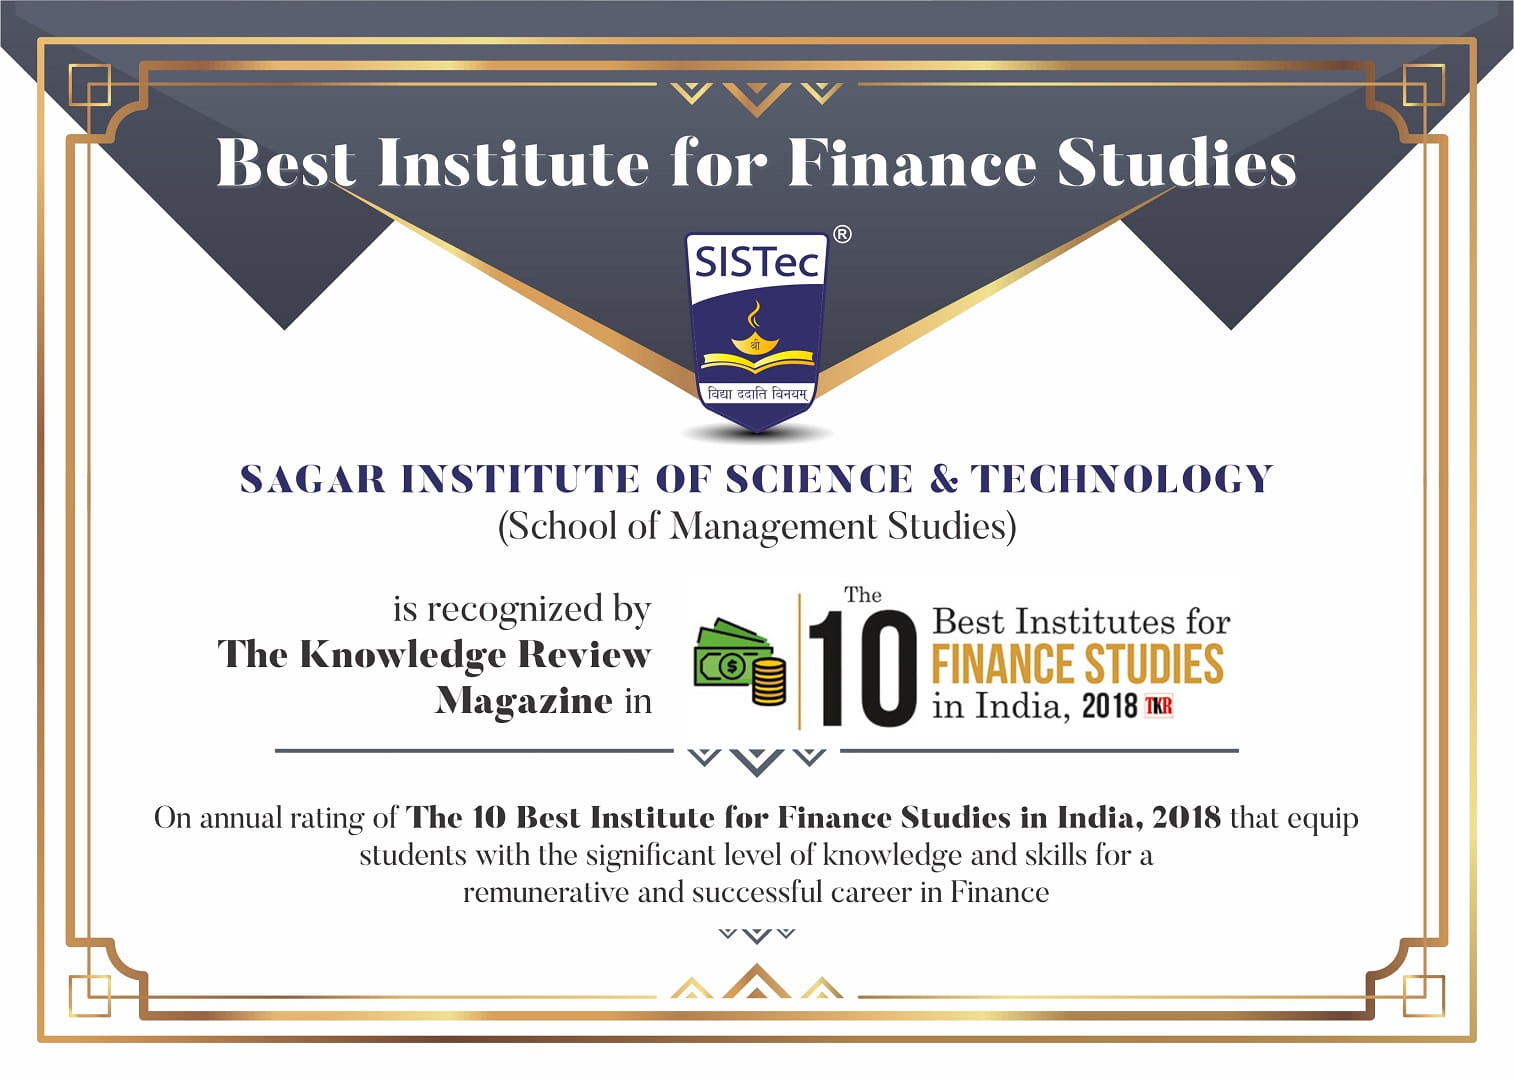 The 10 Best Institute for Finance Studies in India